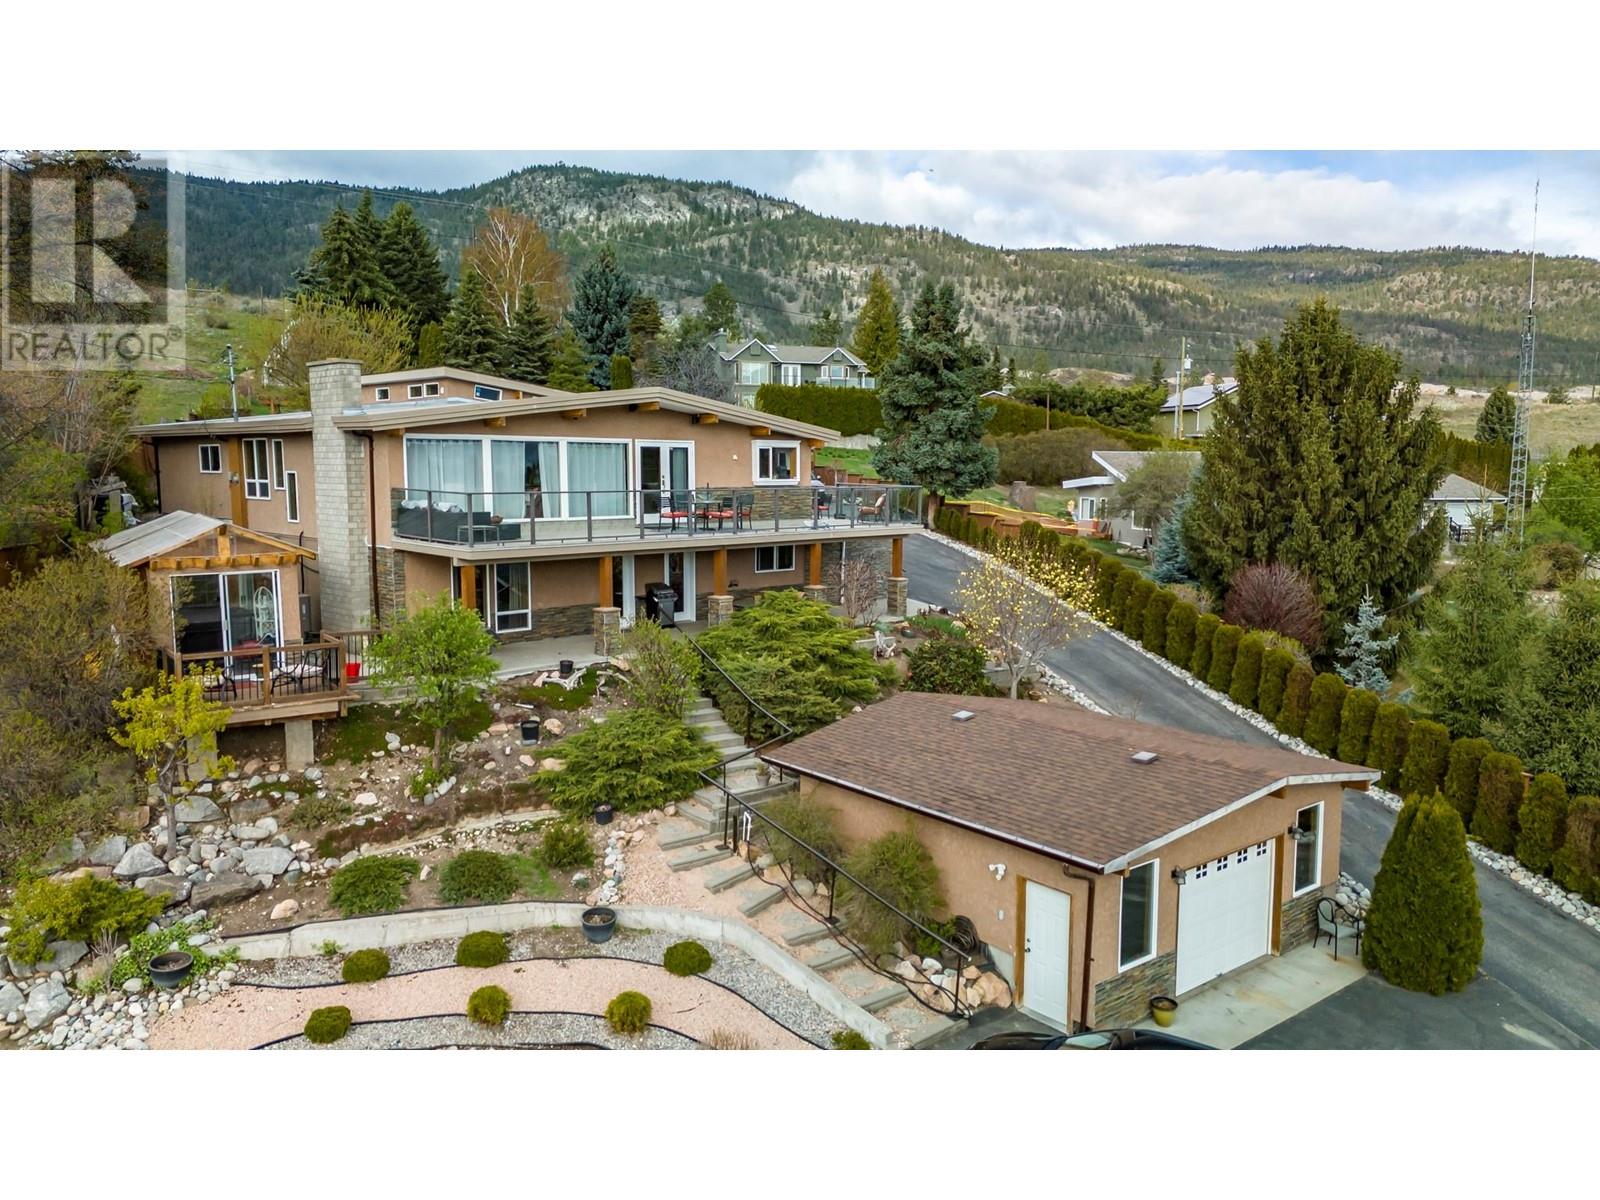 404 West Bench Drive, Penticton, British Columbia  V2A 8X9 - Photo 1 - 10311234